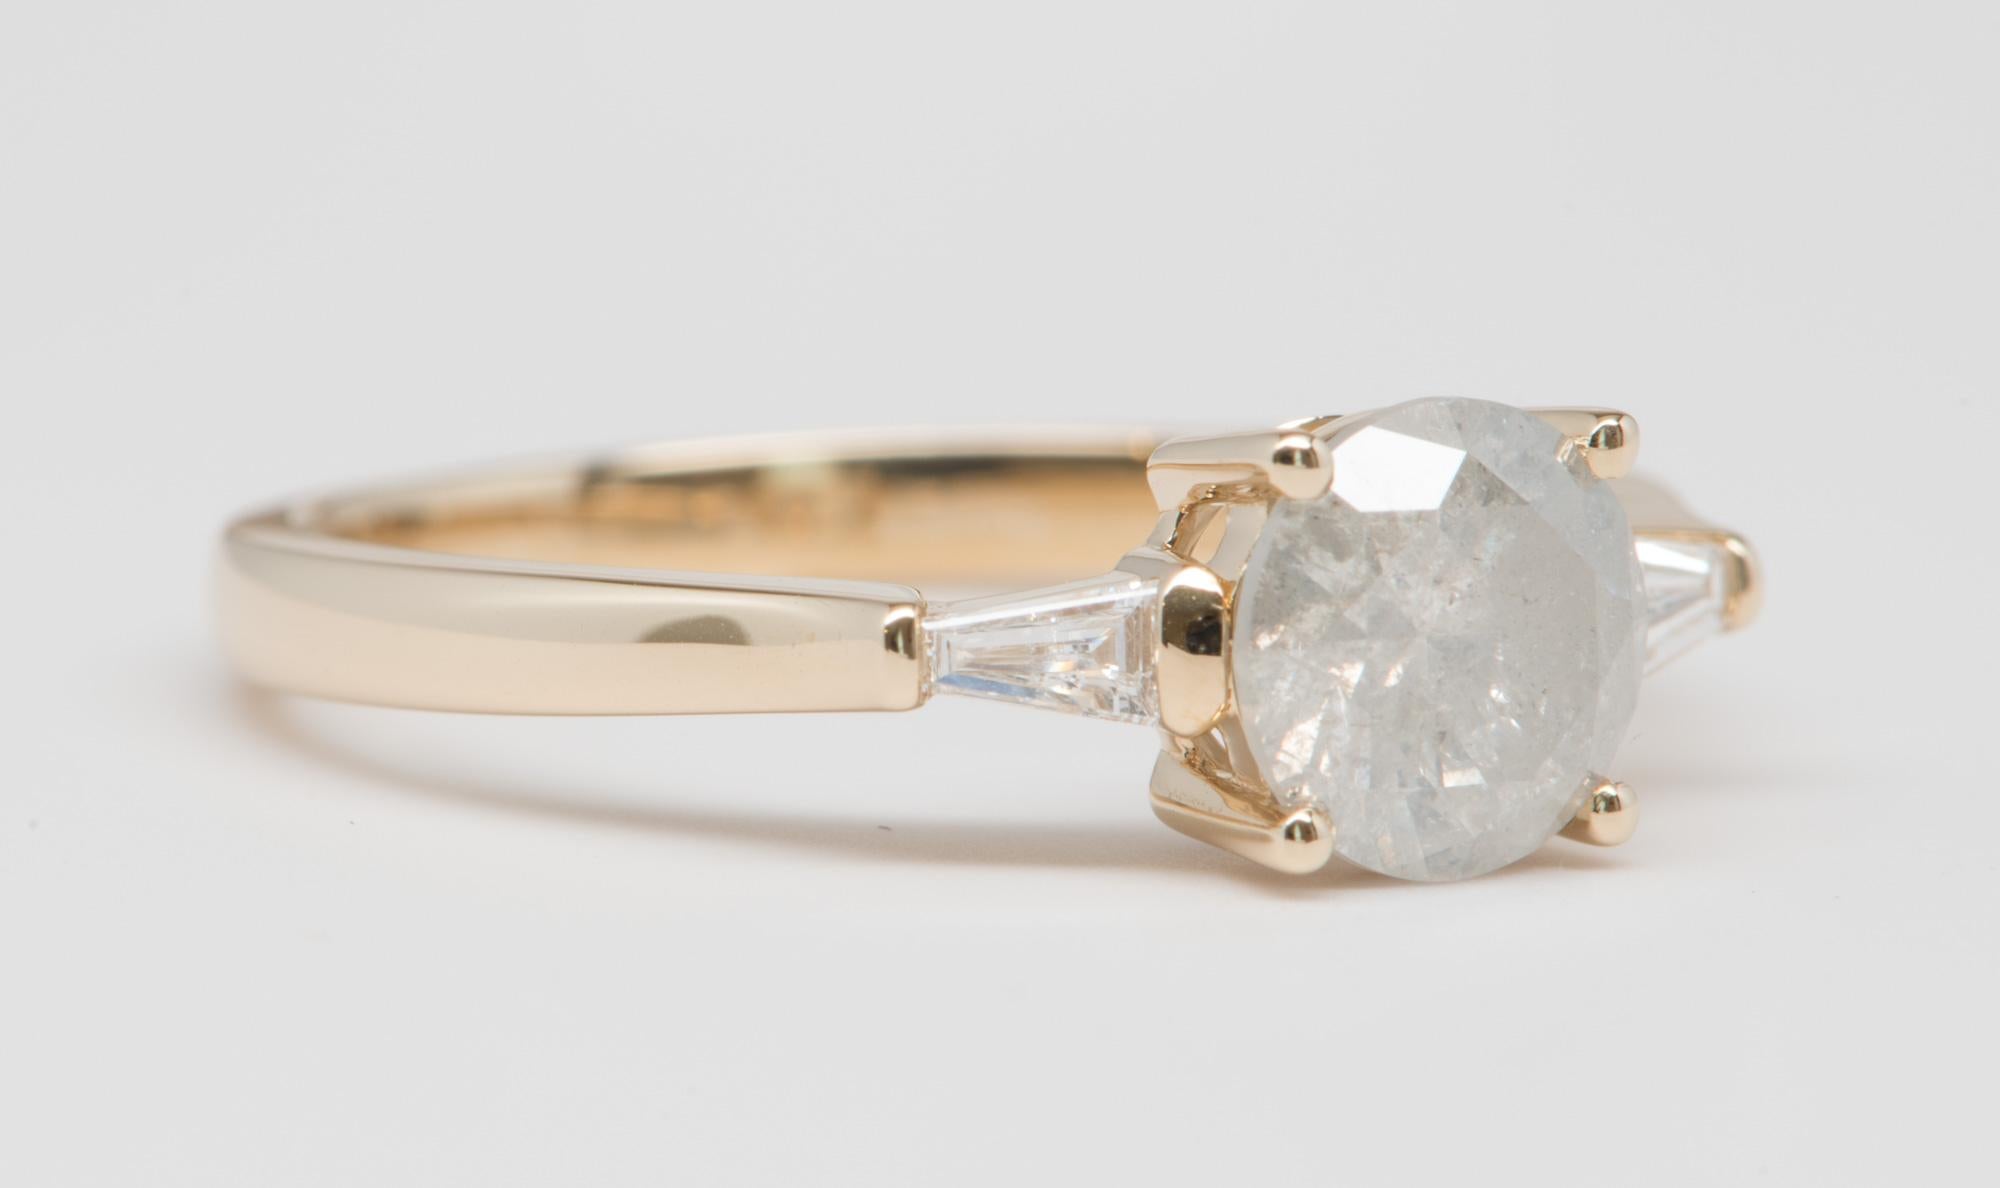 ♥  Solid 14K yellow gold ring set with a round brilliant cut milky white diamond center, flanked by tapered baguette diamonds on the side to complement the center stone
♥  The overall setting measures 14.2mm in width, 6.3mm in length, and sits 4.3mm